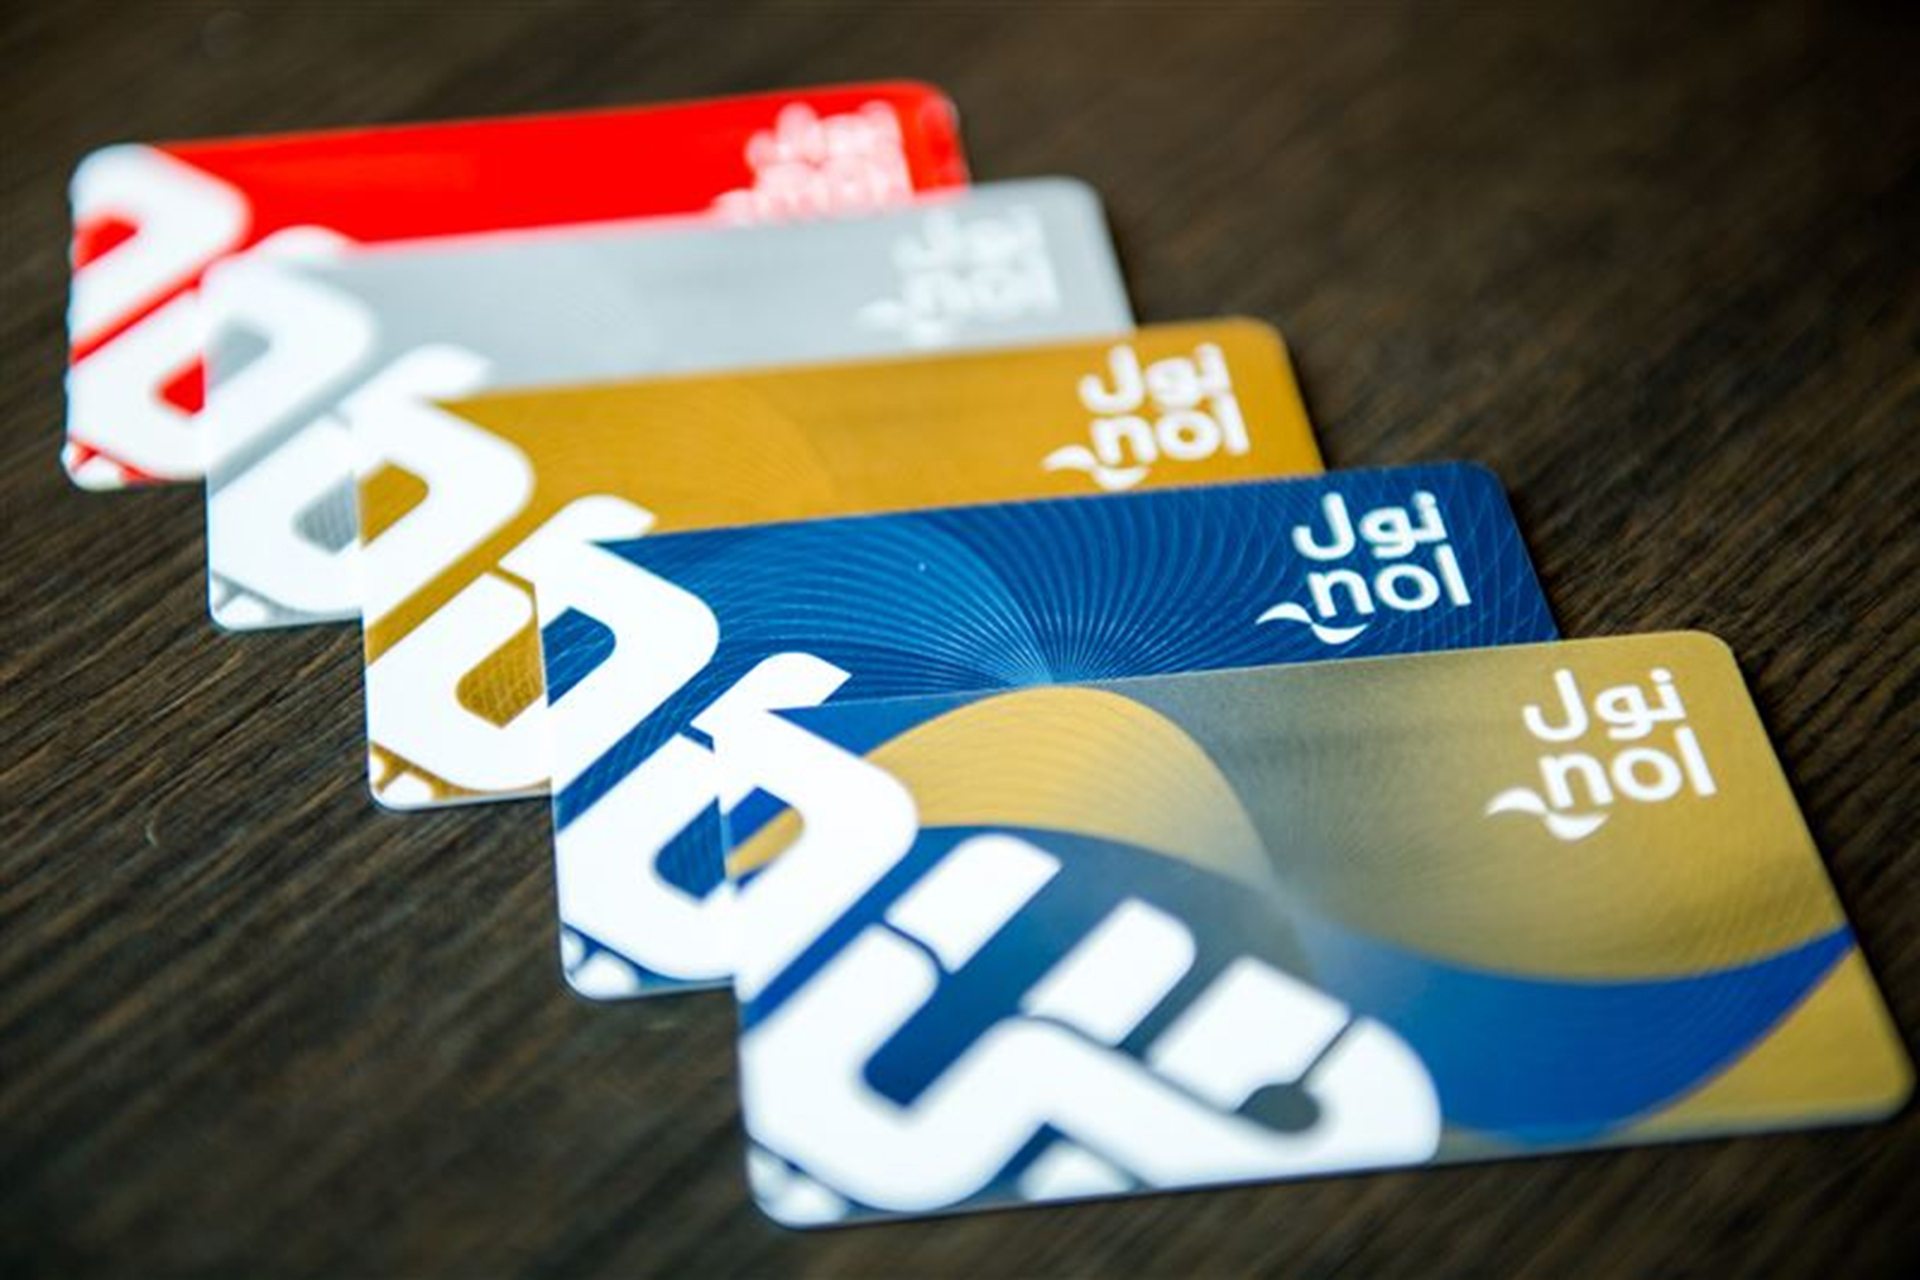 nol card discounts: How to save cash with points earned